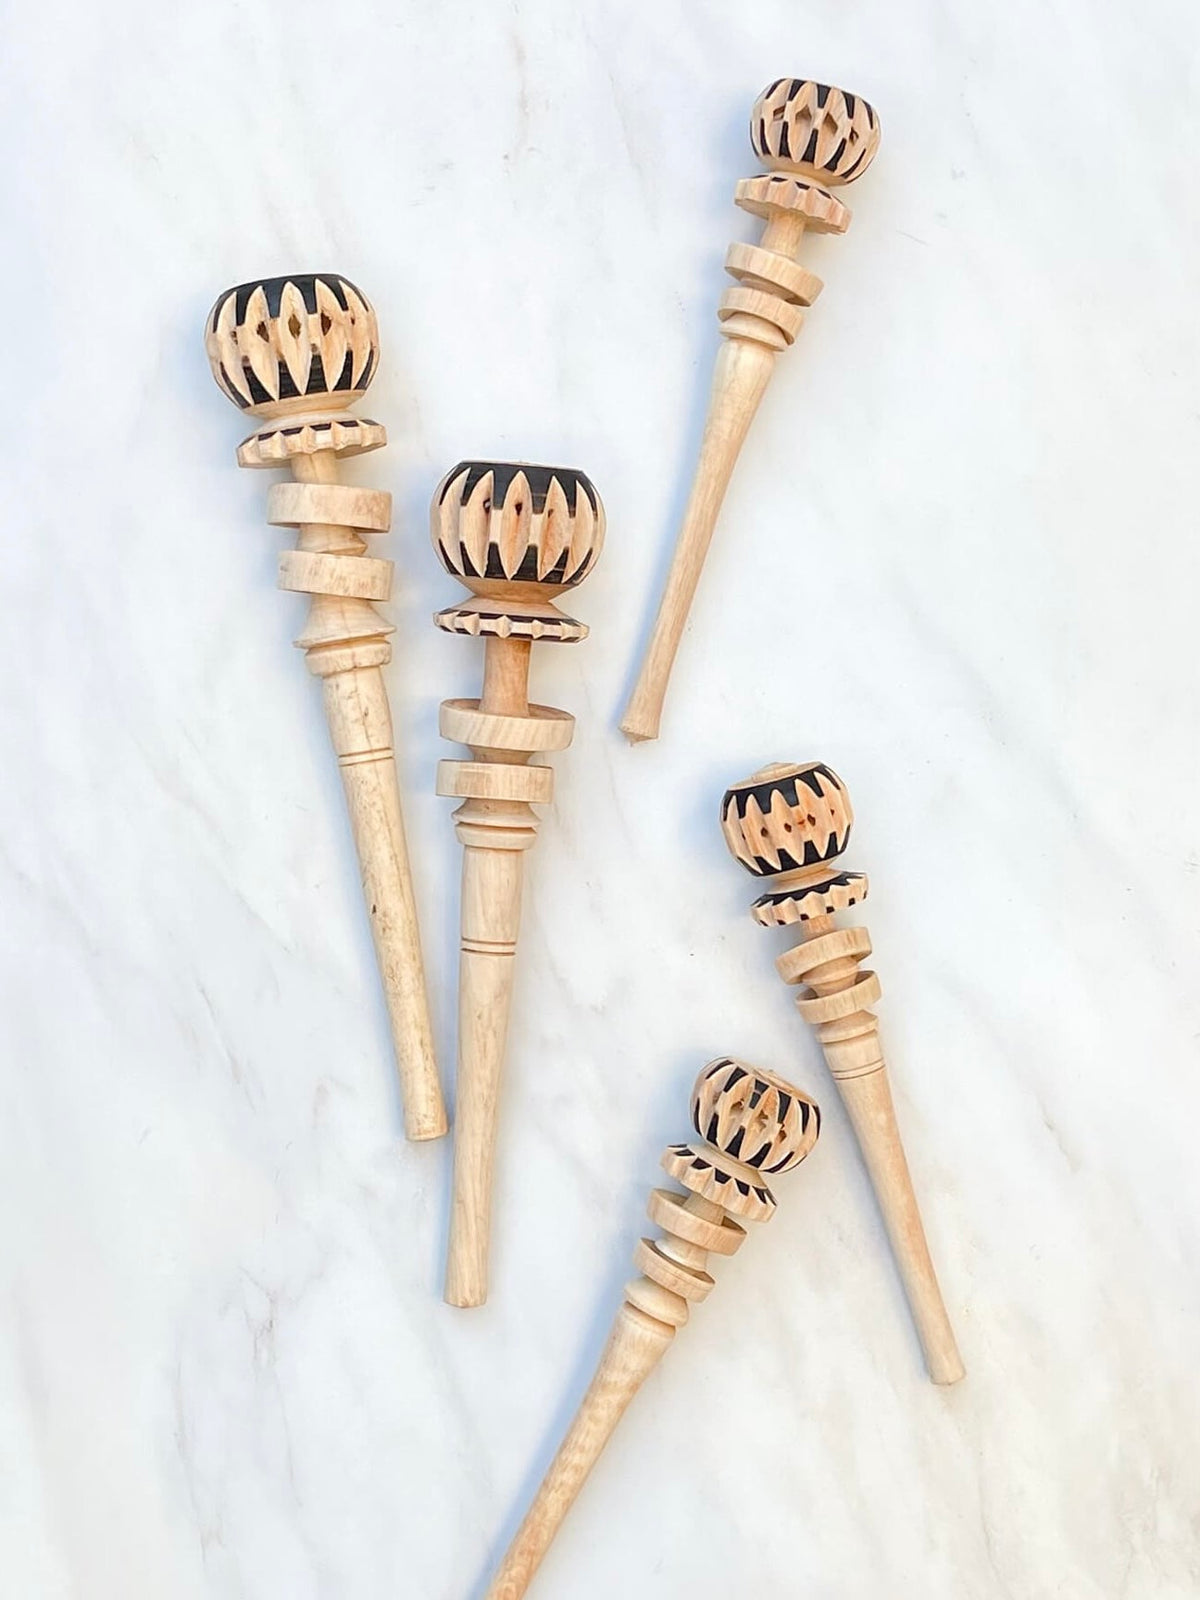 Champs Artisanal Mexican Molinillo 12.5-inch | Mexican Hot Chocolate Mixer | Molinillo de Chocolate de Madera | Wood Stirrer Whisk | Handmade